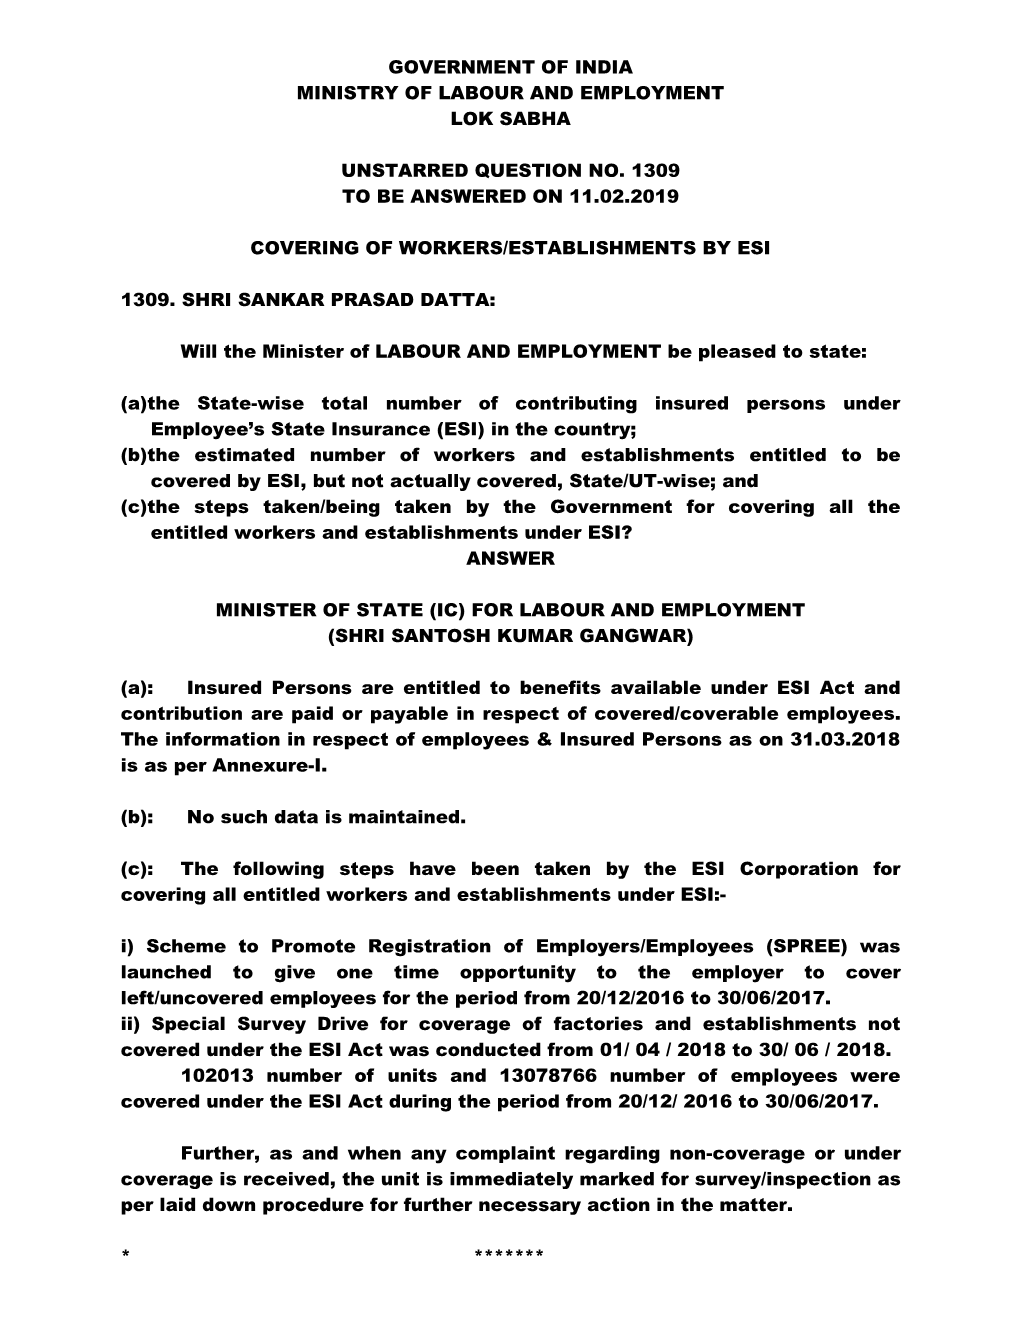 Government of India Ministry of Labour and Employment Lok Sabha Unstarred Question No. 1309 to Be Answered on 11.02.2019 Coverin